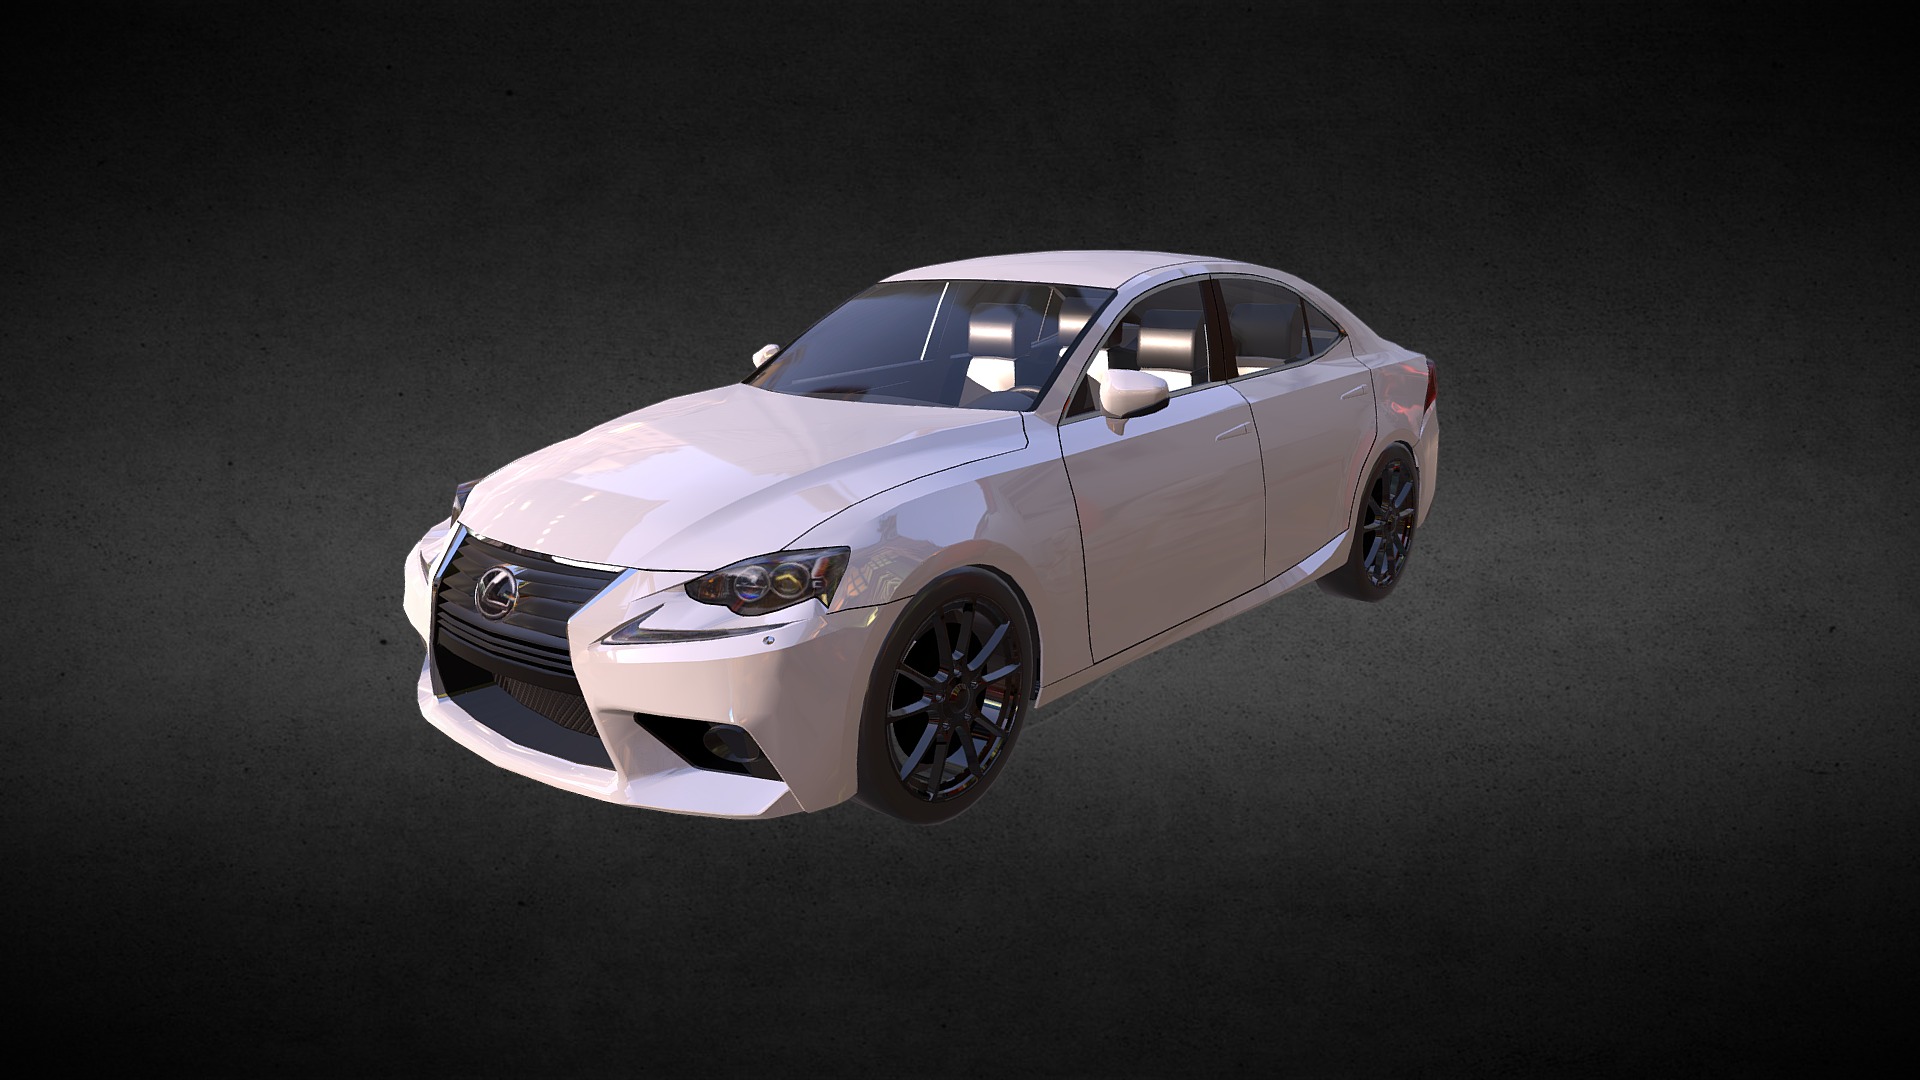 3D model 2016 Lexus IS 350 - This is a 3D model of the 2016 Lexus IS 350. The 3D model is about a white car parked on a road.